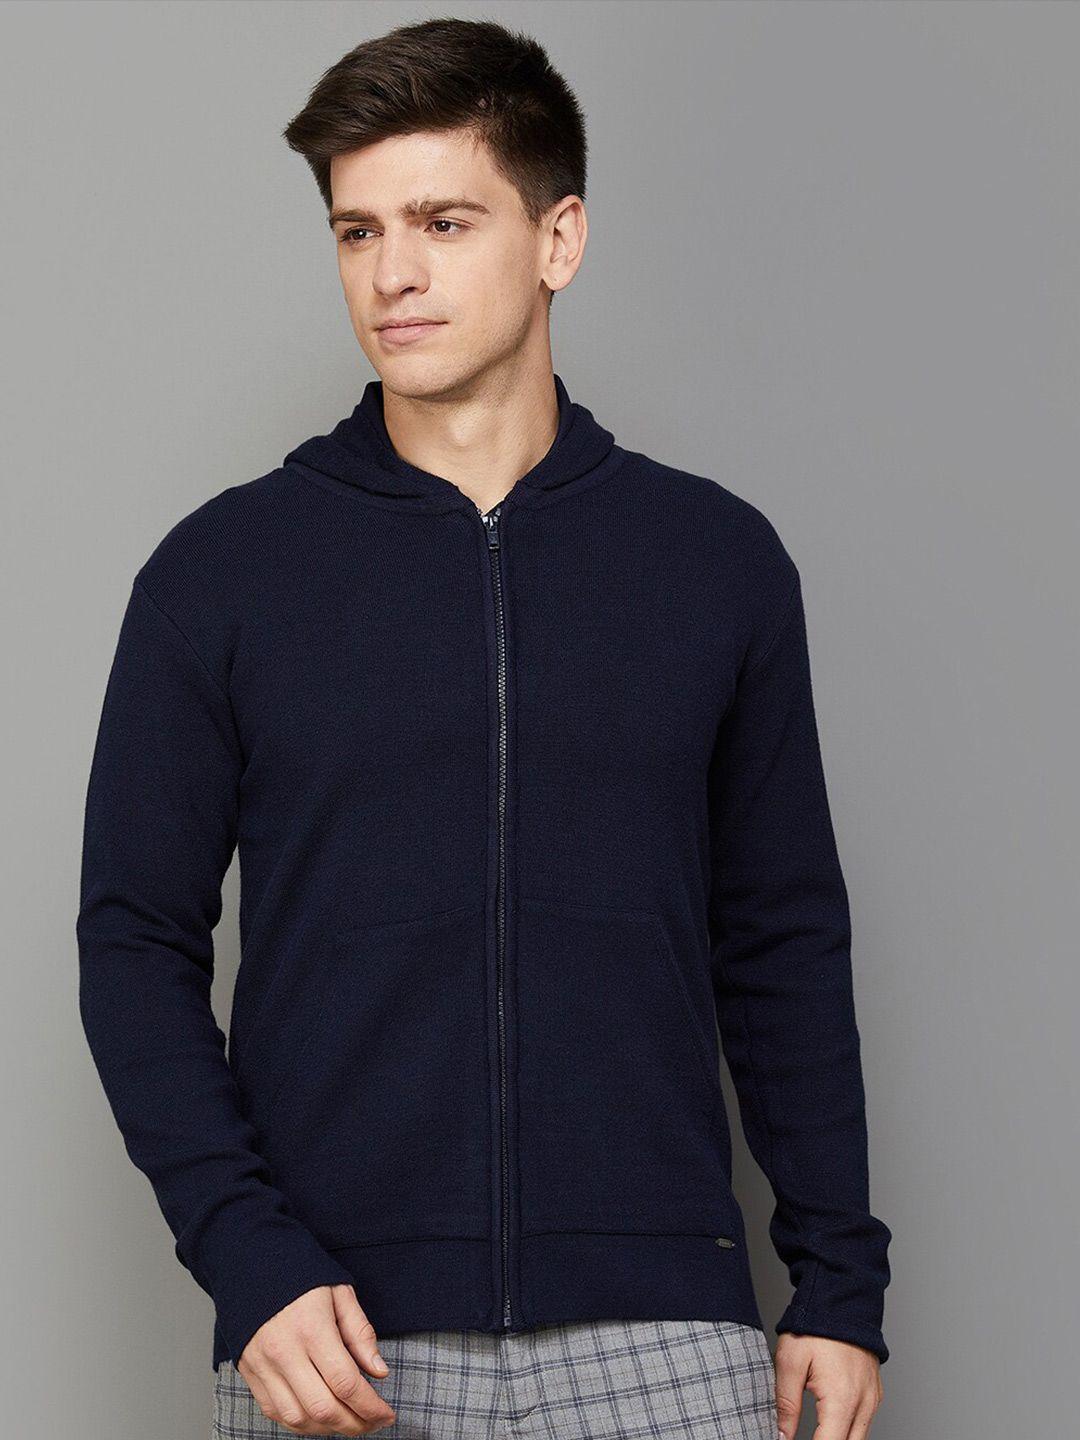 code-by-lifestyle-hooded-front-open-sweatshirt